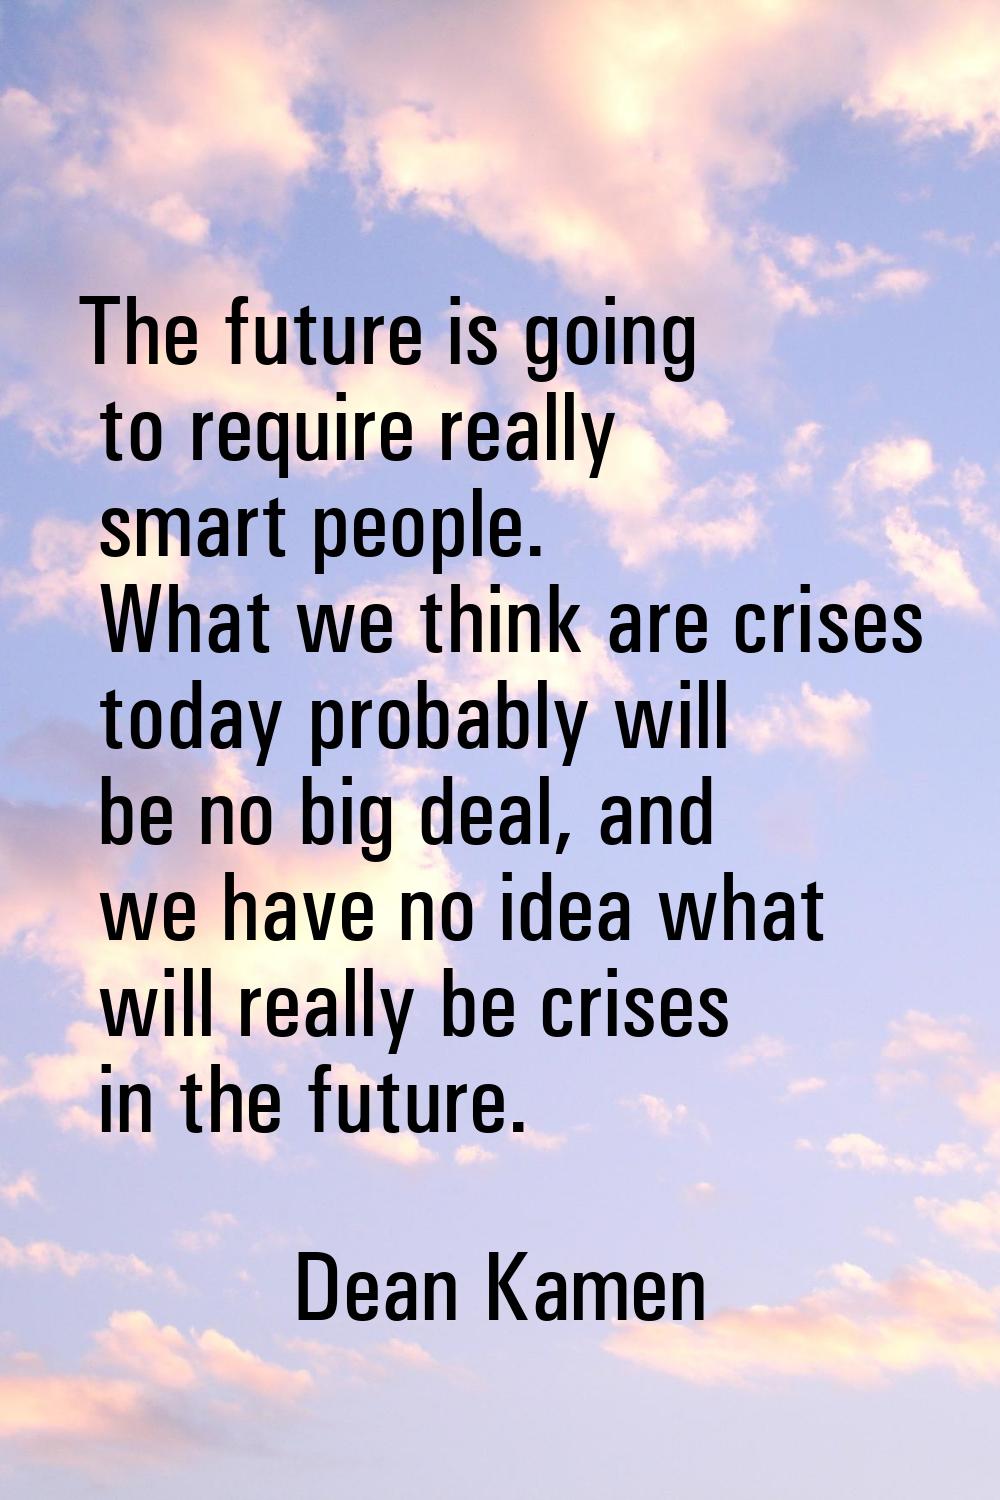 The future is going to require really smart people. What we think are crises today probably will be